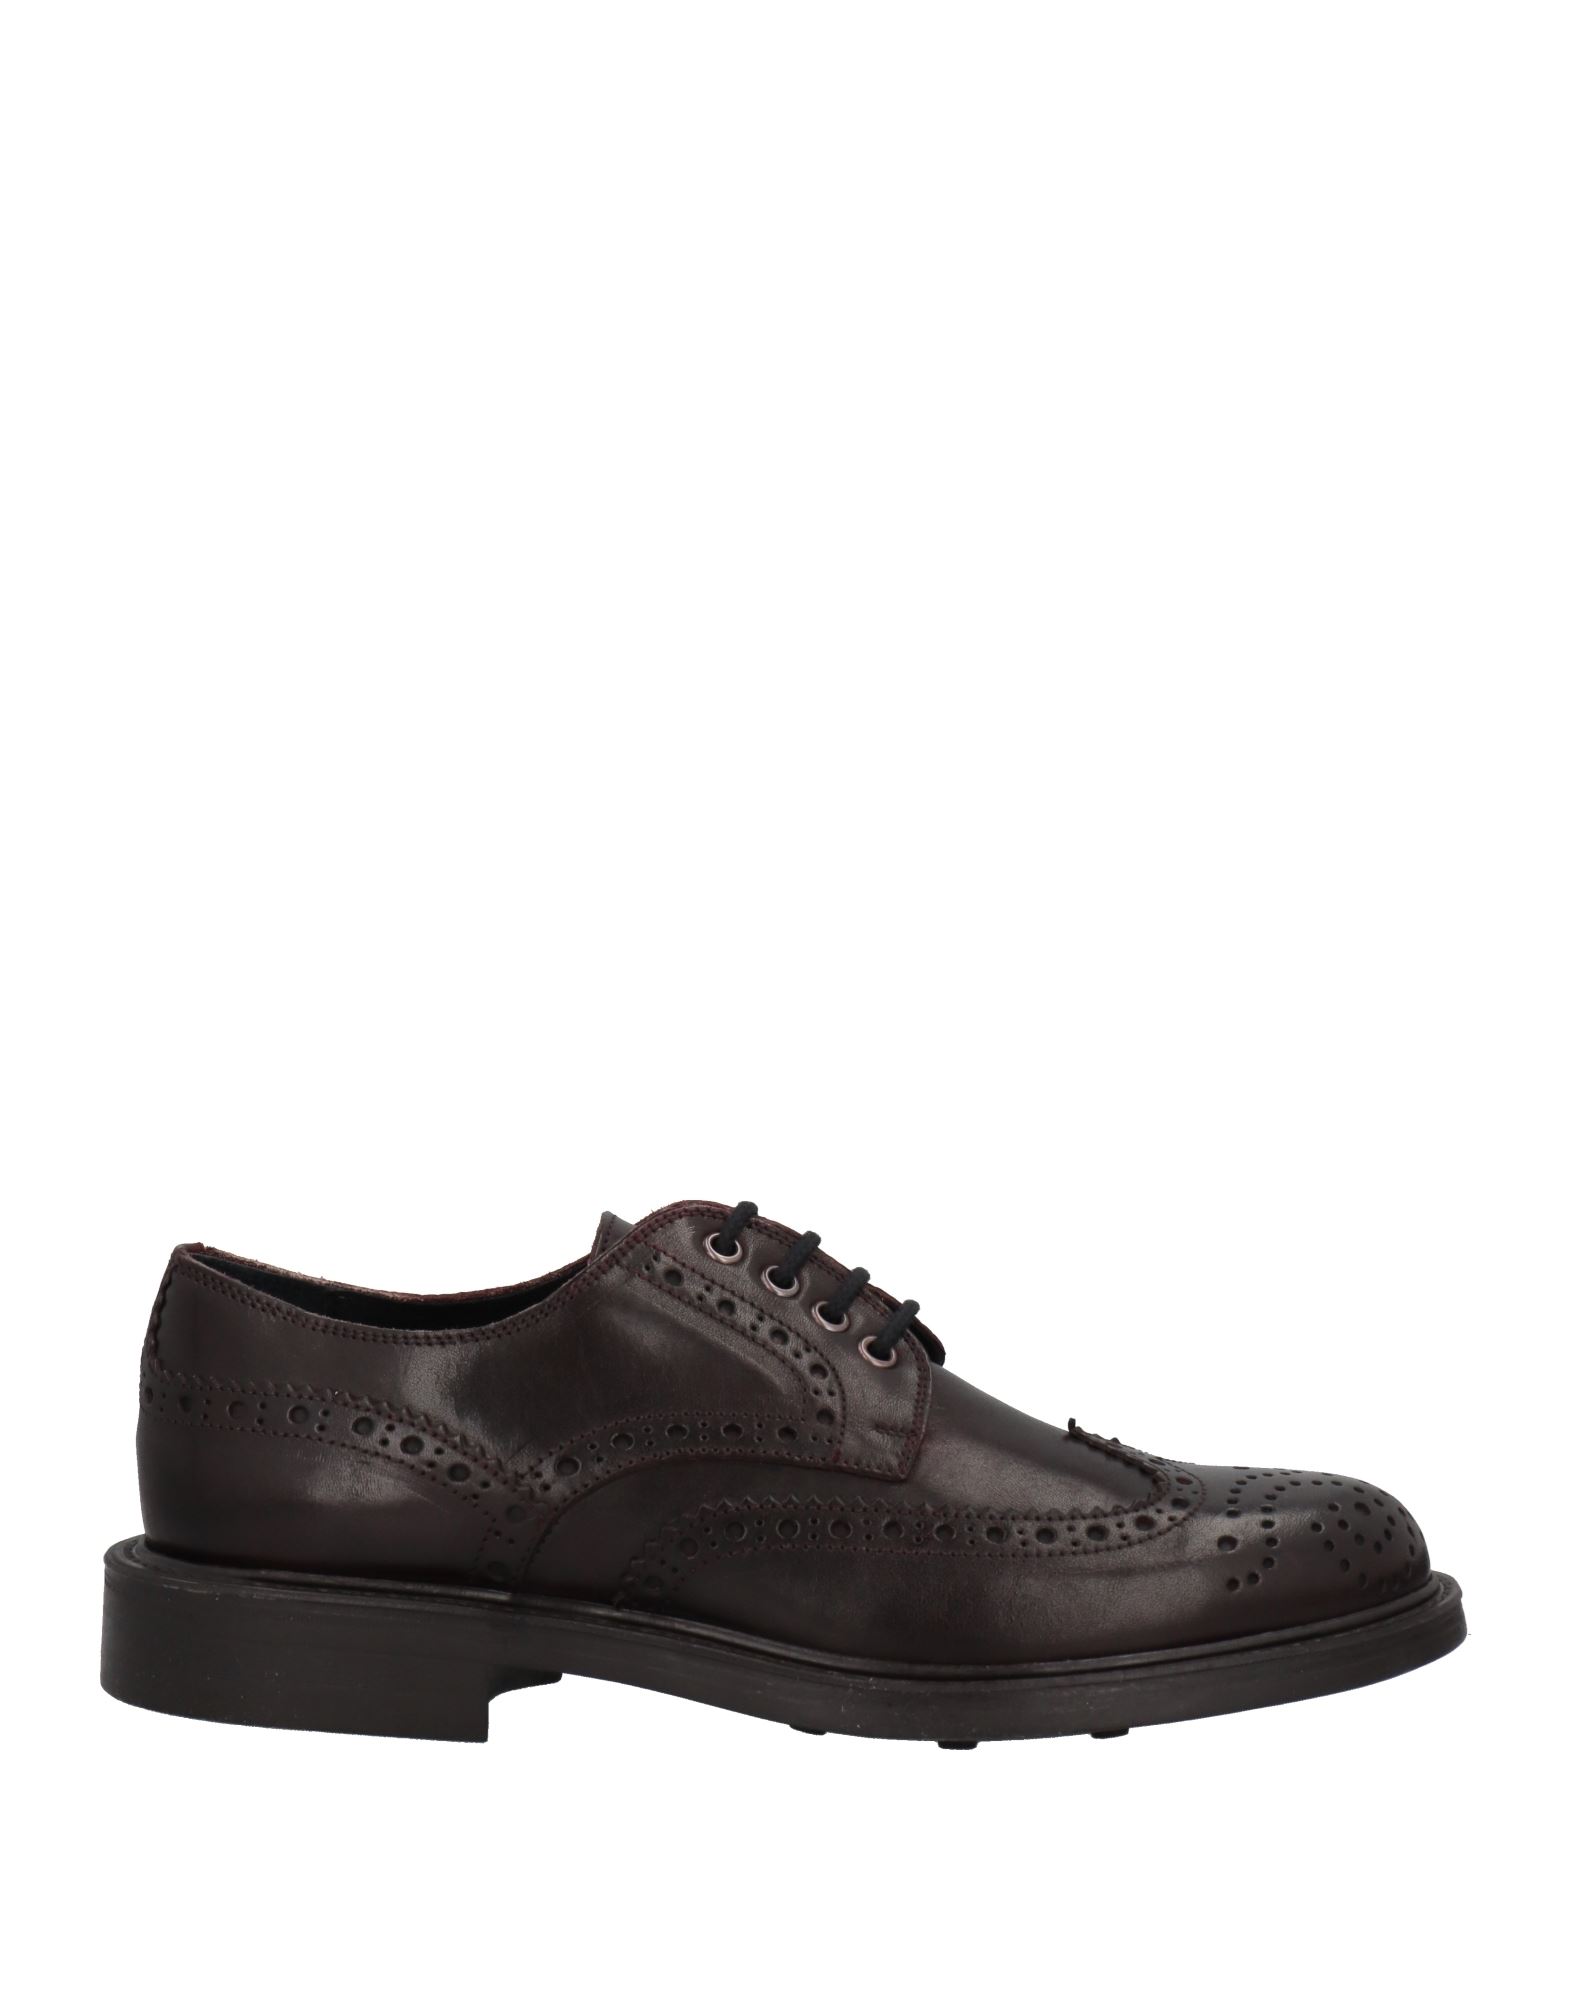 Ciro Lendini Lace-up Shoes In Brown